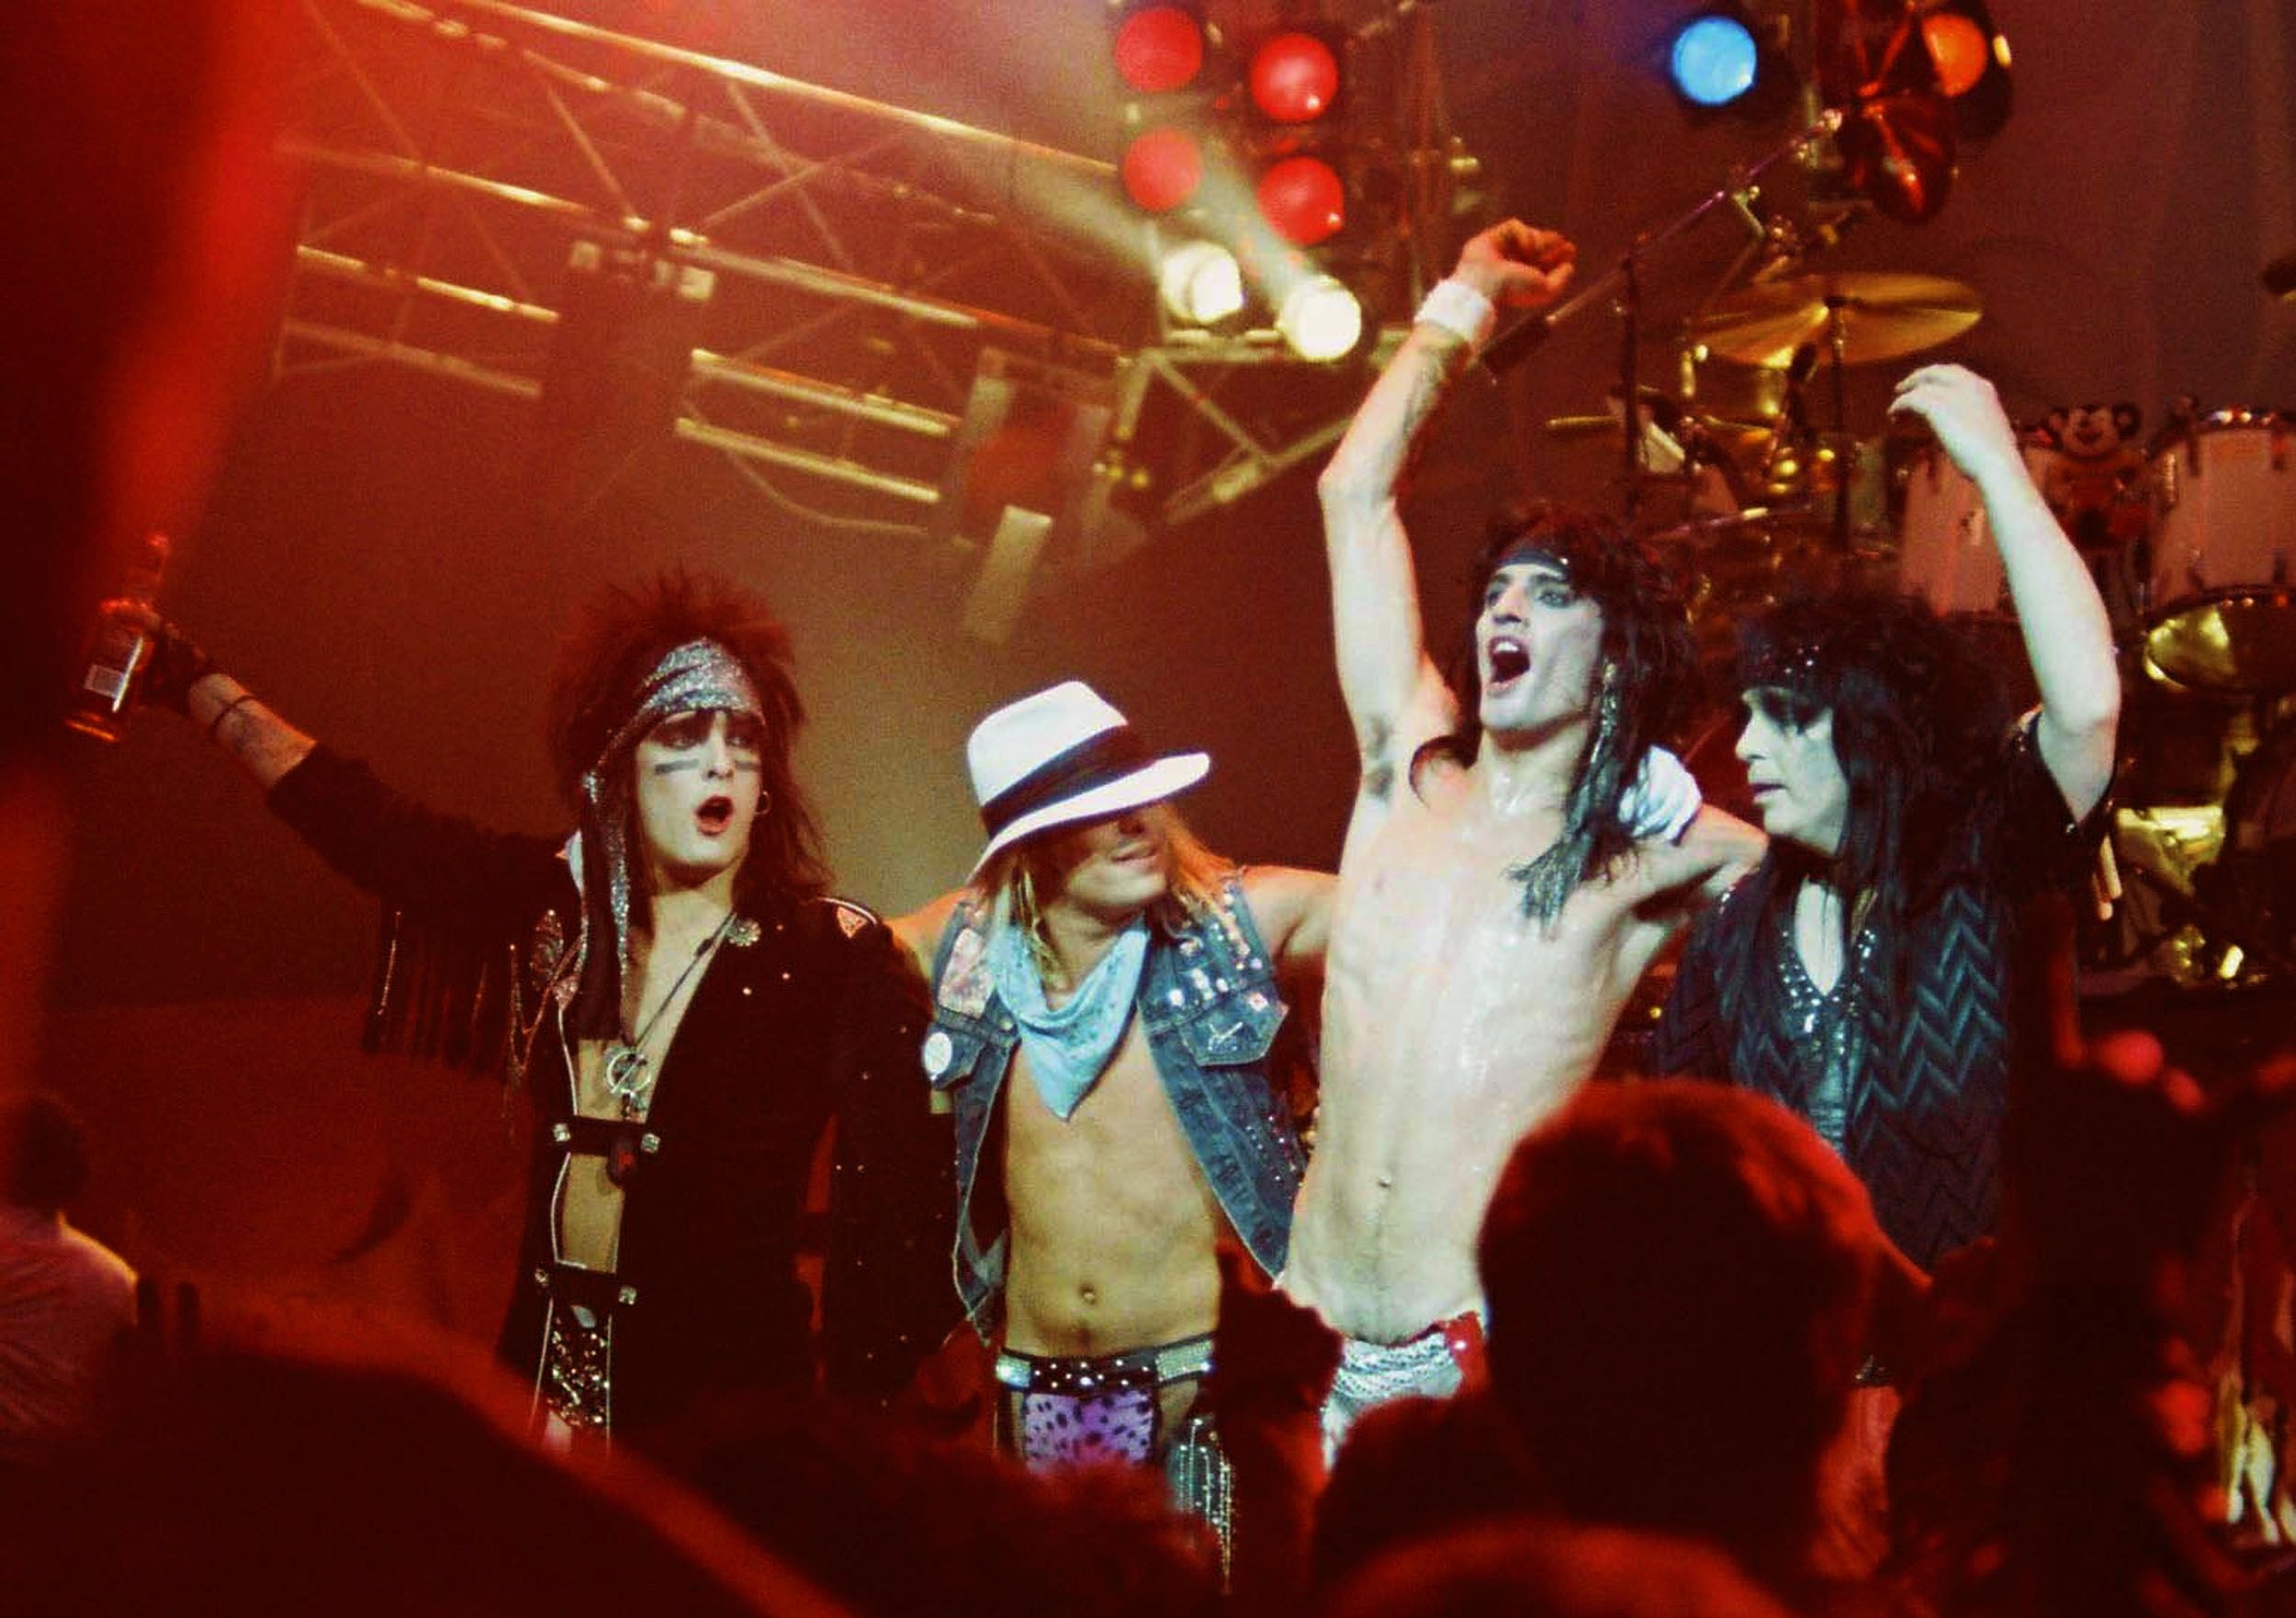 HD wallpaper, Motley Crue Photos   Pictures Of Motley Crue Partying And Playing Music In The 1980S 2500X1770, Desktop Hd Mick Mars Background Photo